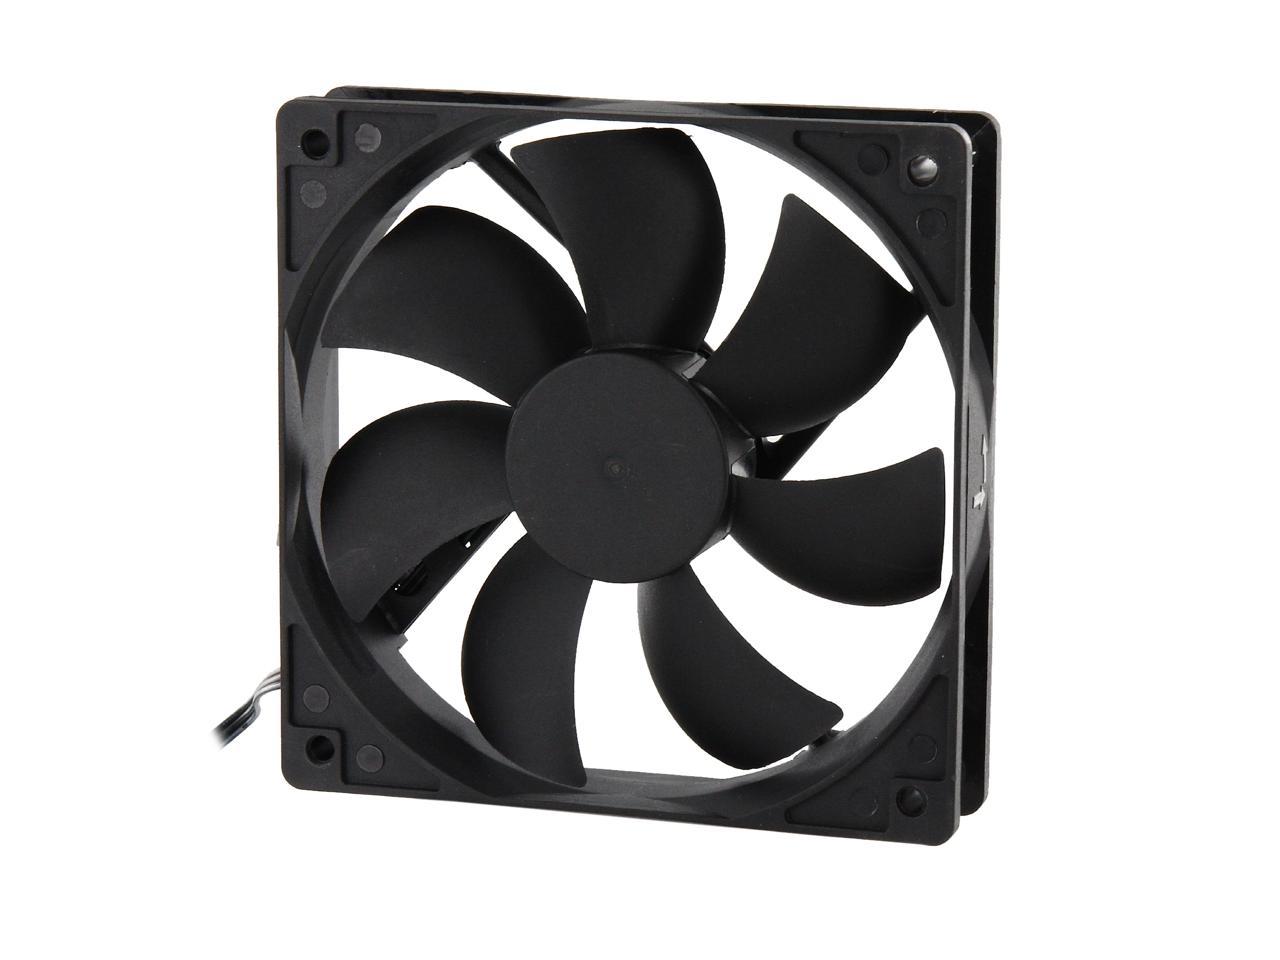 Rosewill 120mm Computer Case Cooling Fans ROCF-13001-38.2 CFM Pack of 4 